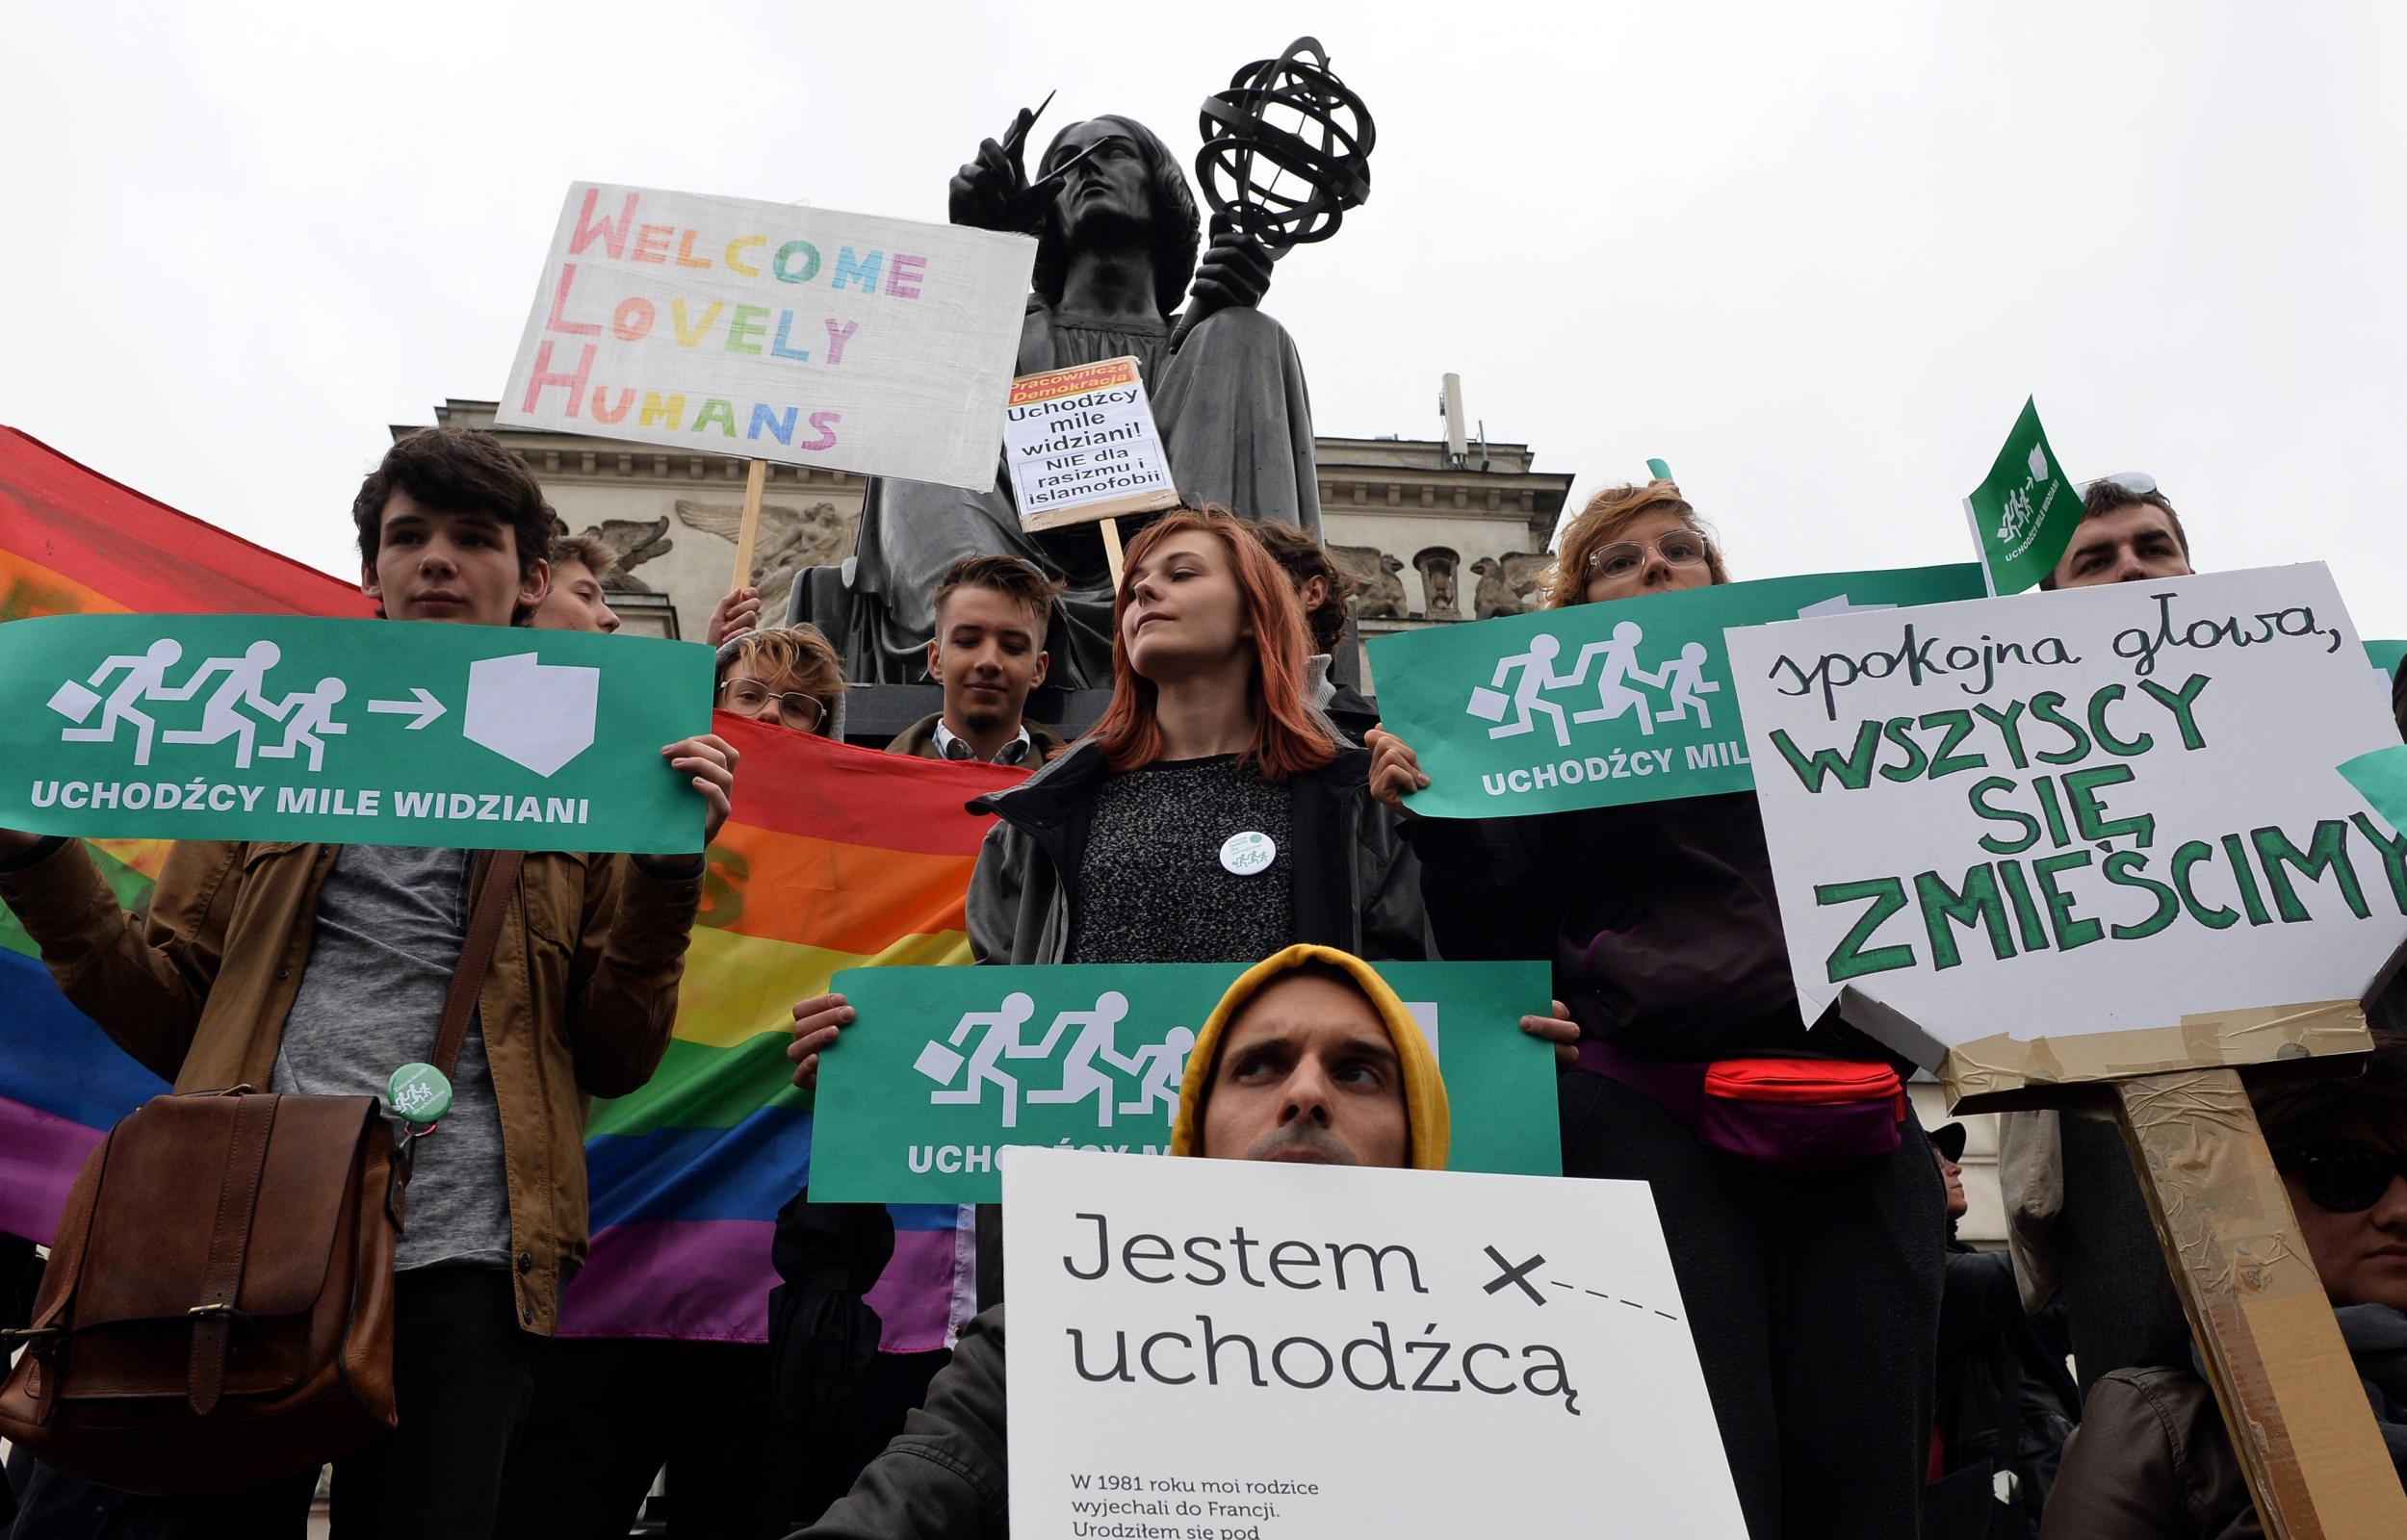 A pro-migrant demonstration in Warsaw in September 2015